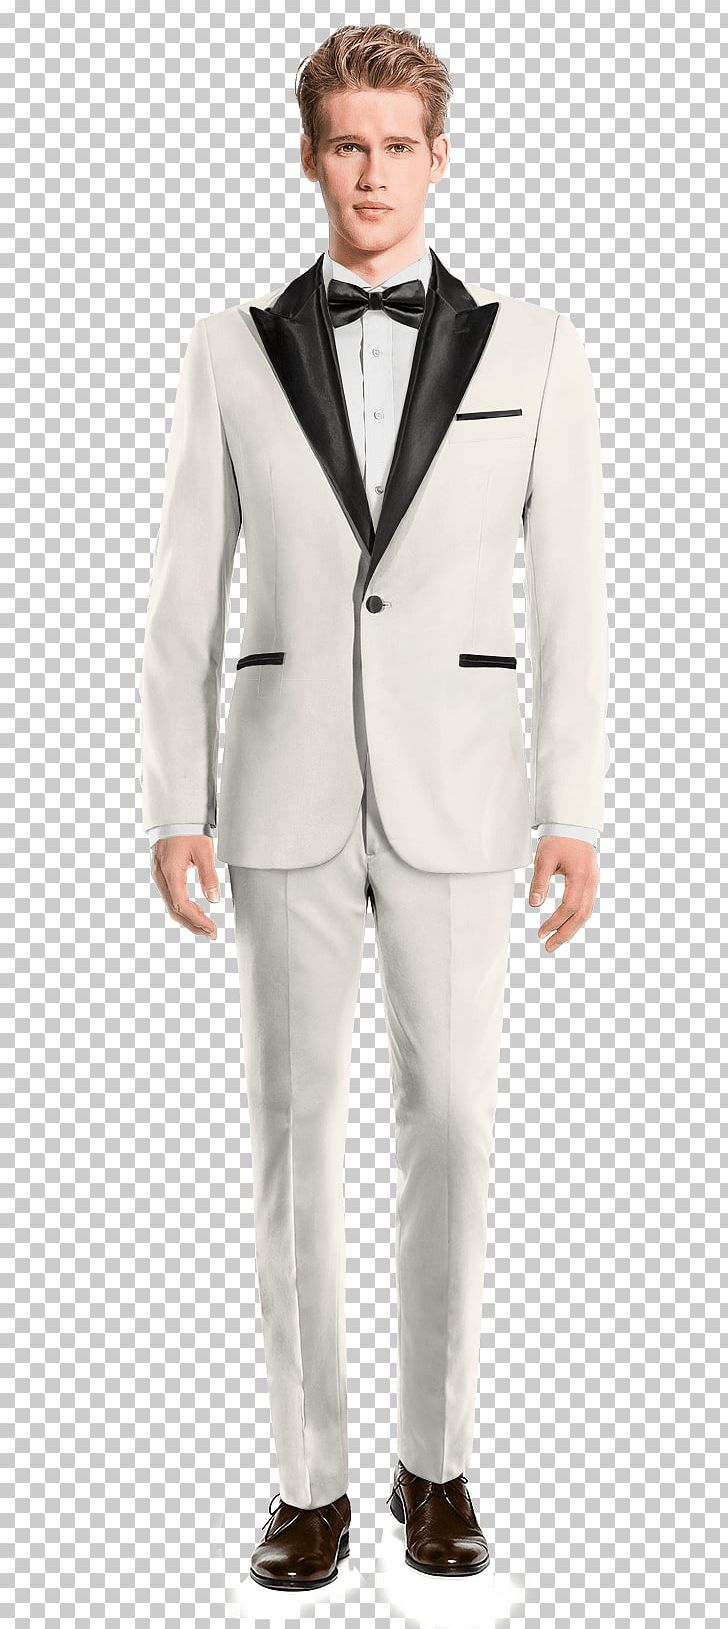 Mao Suit Tuxedo Double-breasted Jacket PNG, Clipart, Blazer, Clothing, Costume, Cotton, Doublebreasted Free PNG Download